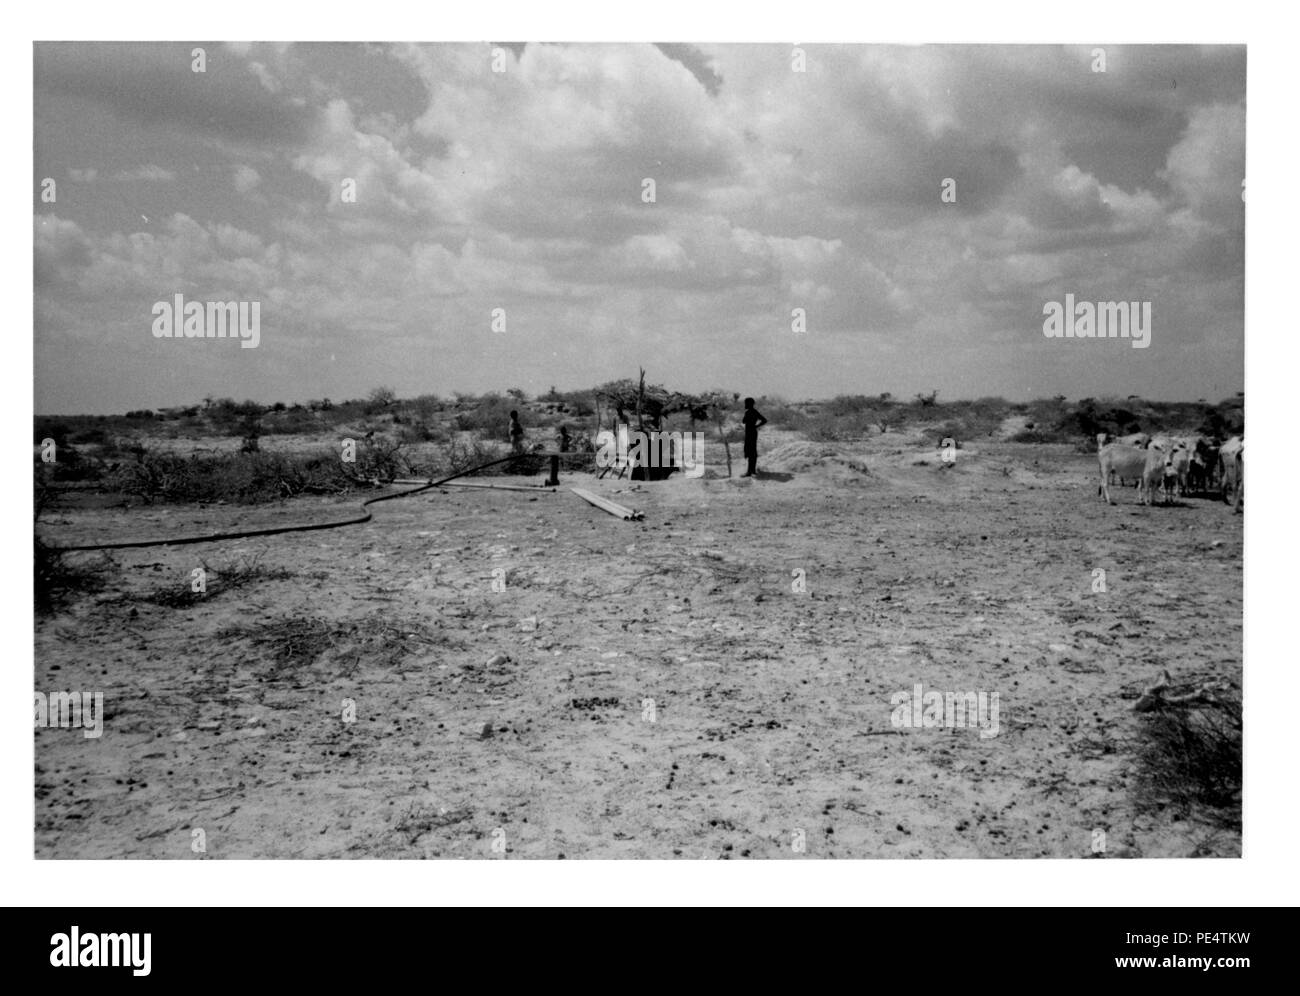 Here is a nearby site to the abandoned well in picture #30 where a successful well has been installed. Notice cattle waiting to be watered. Picture #31. Stock Photo